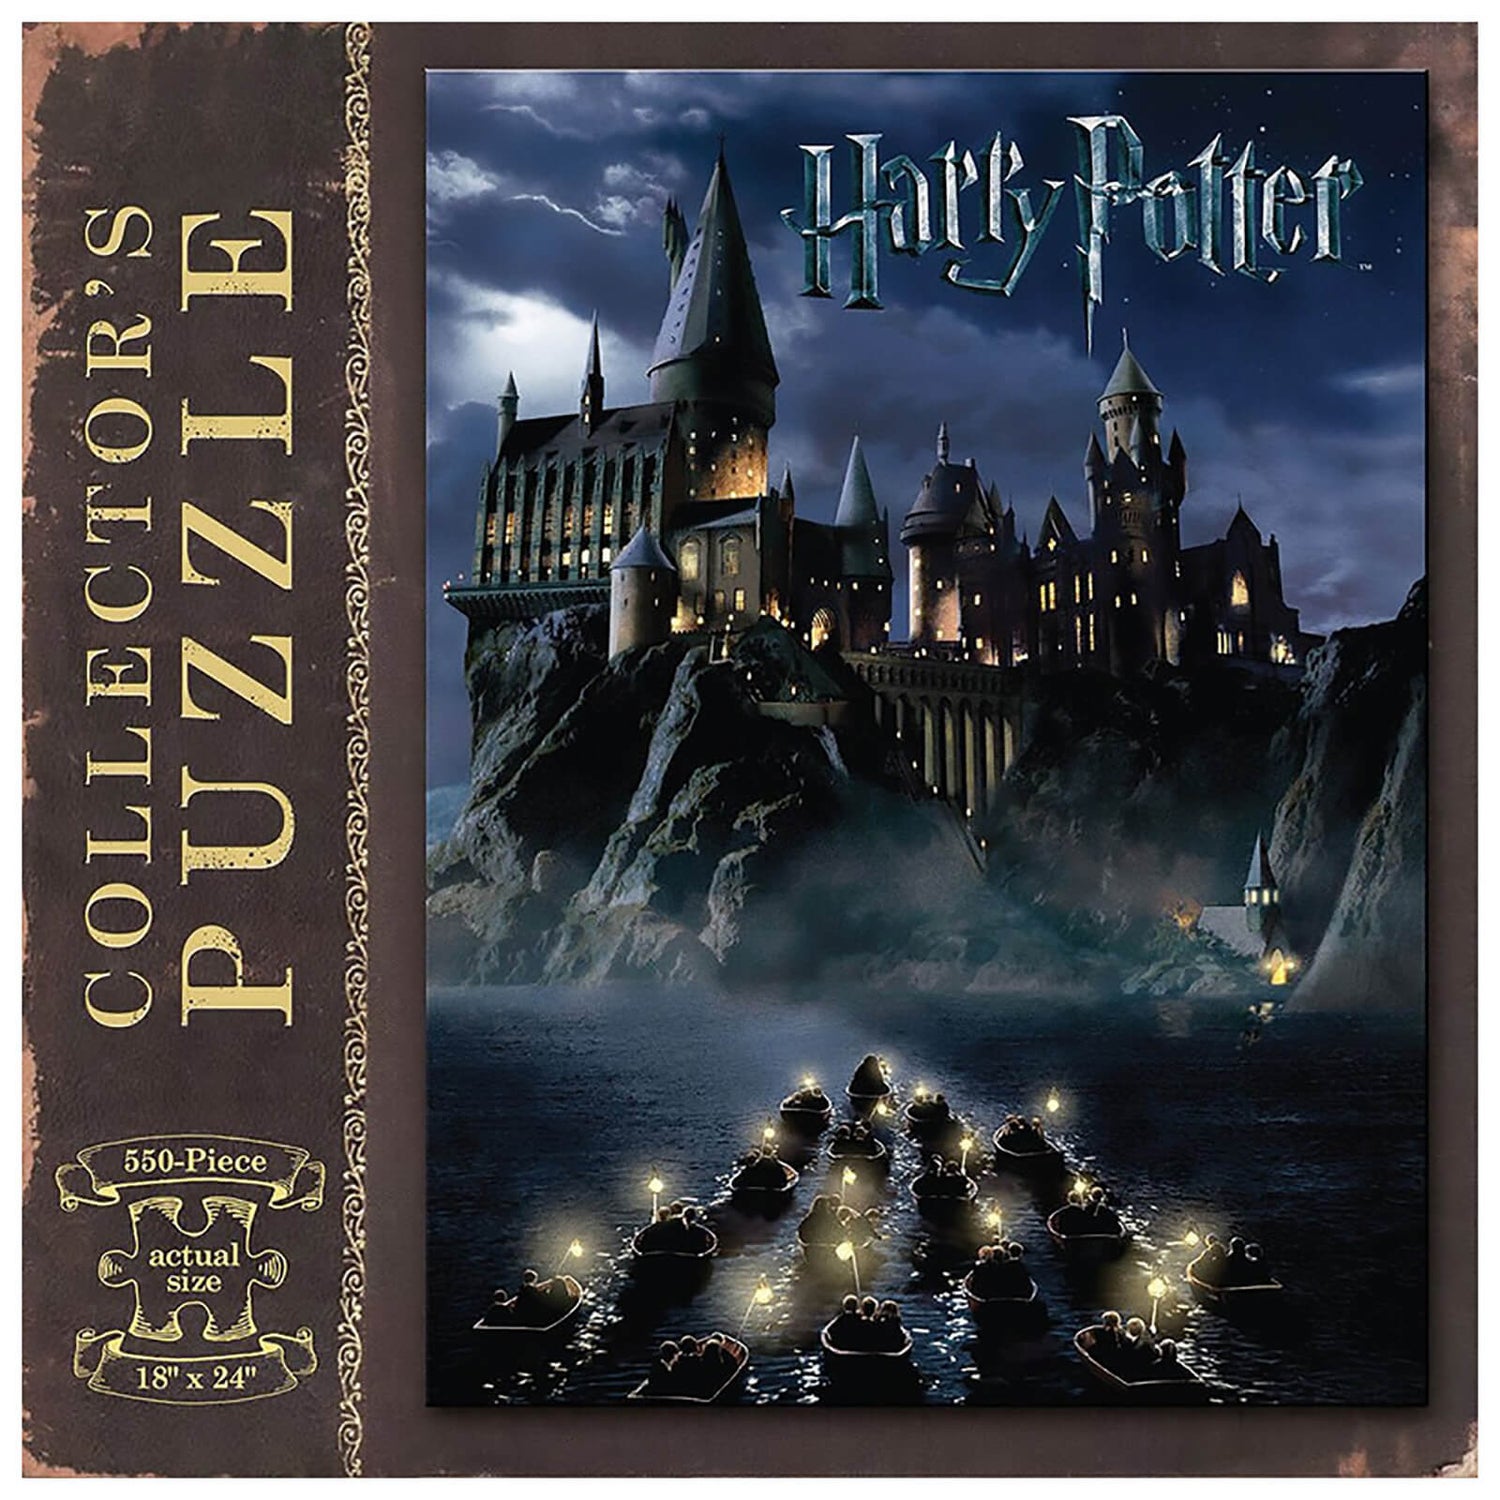 The Wizarding World of Harry Potter Collector's 550 Piece Puzzle